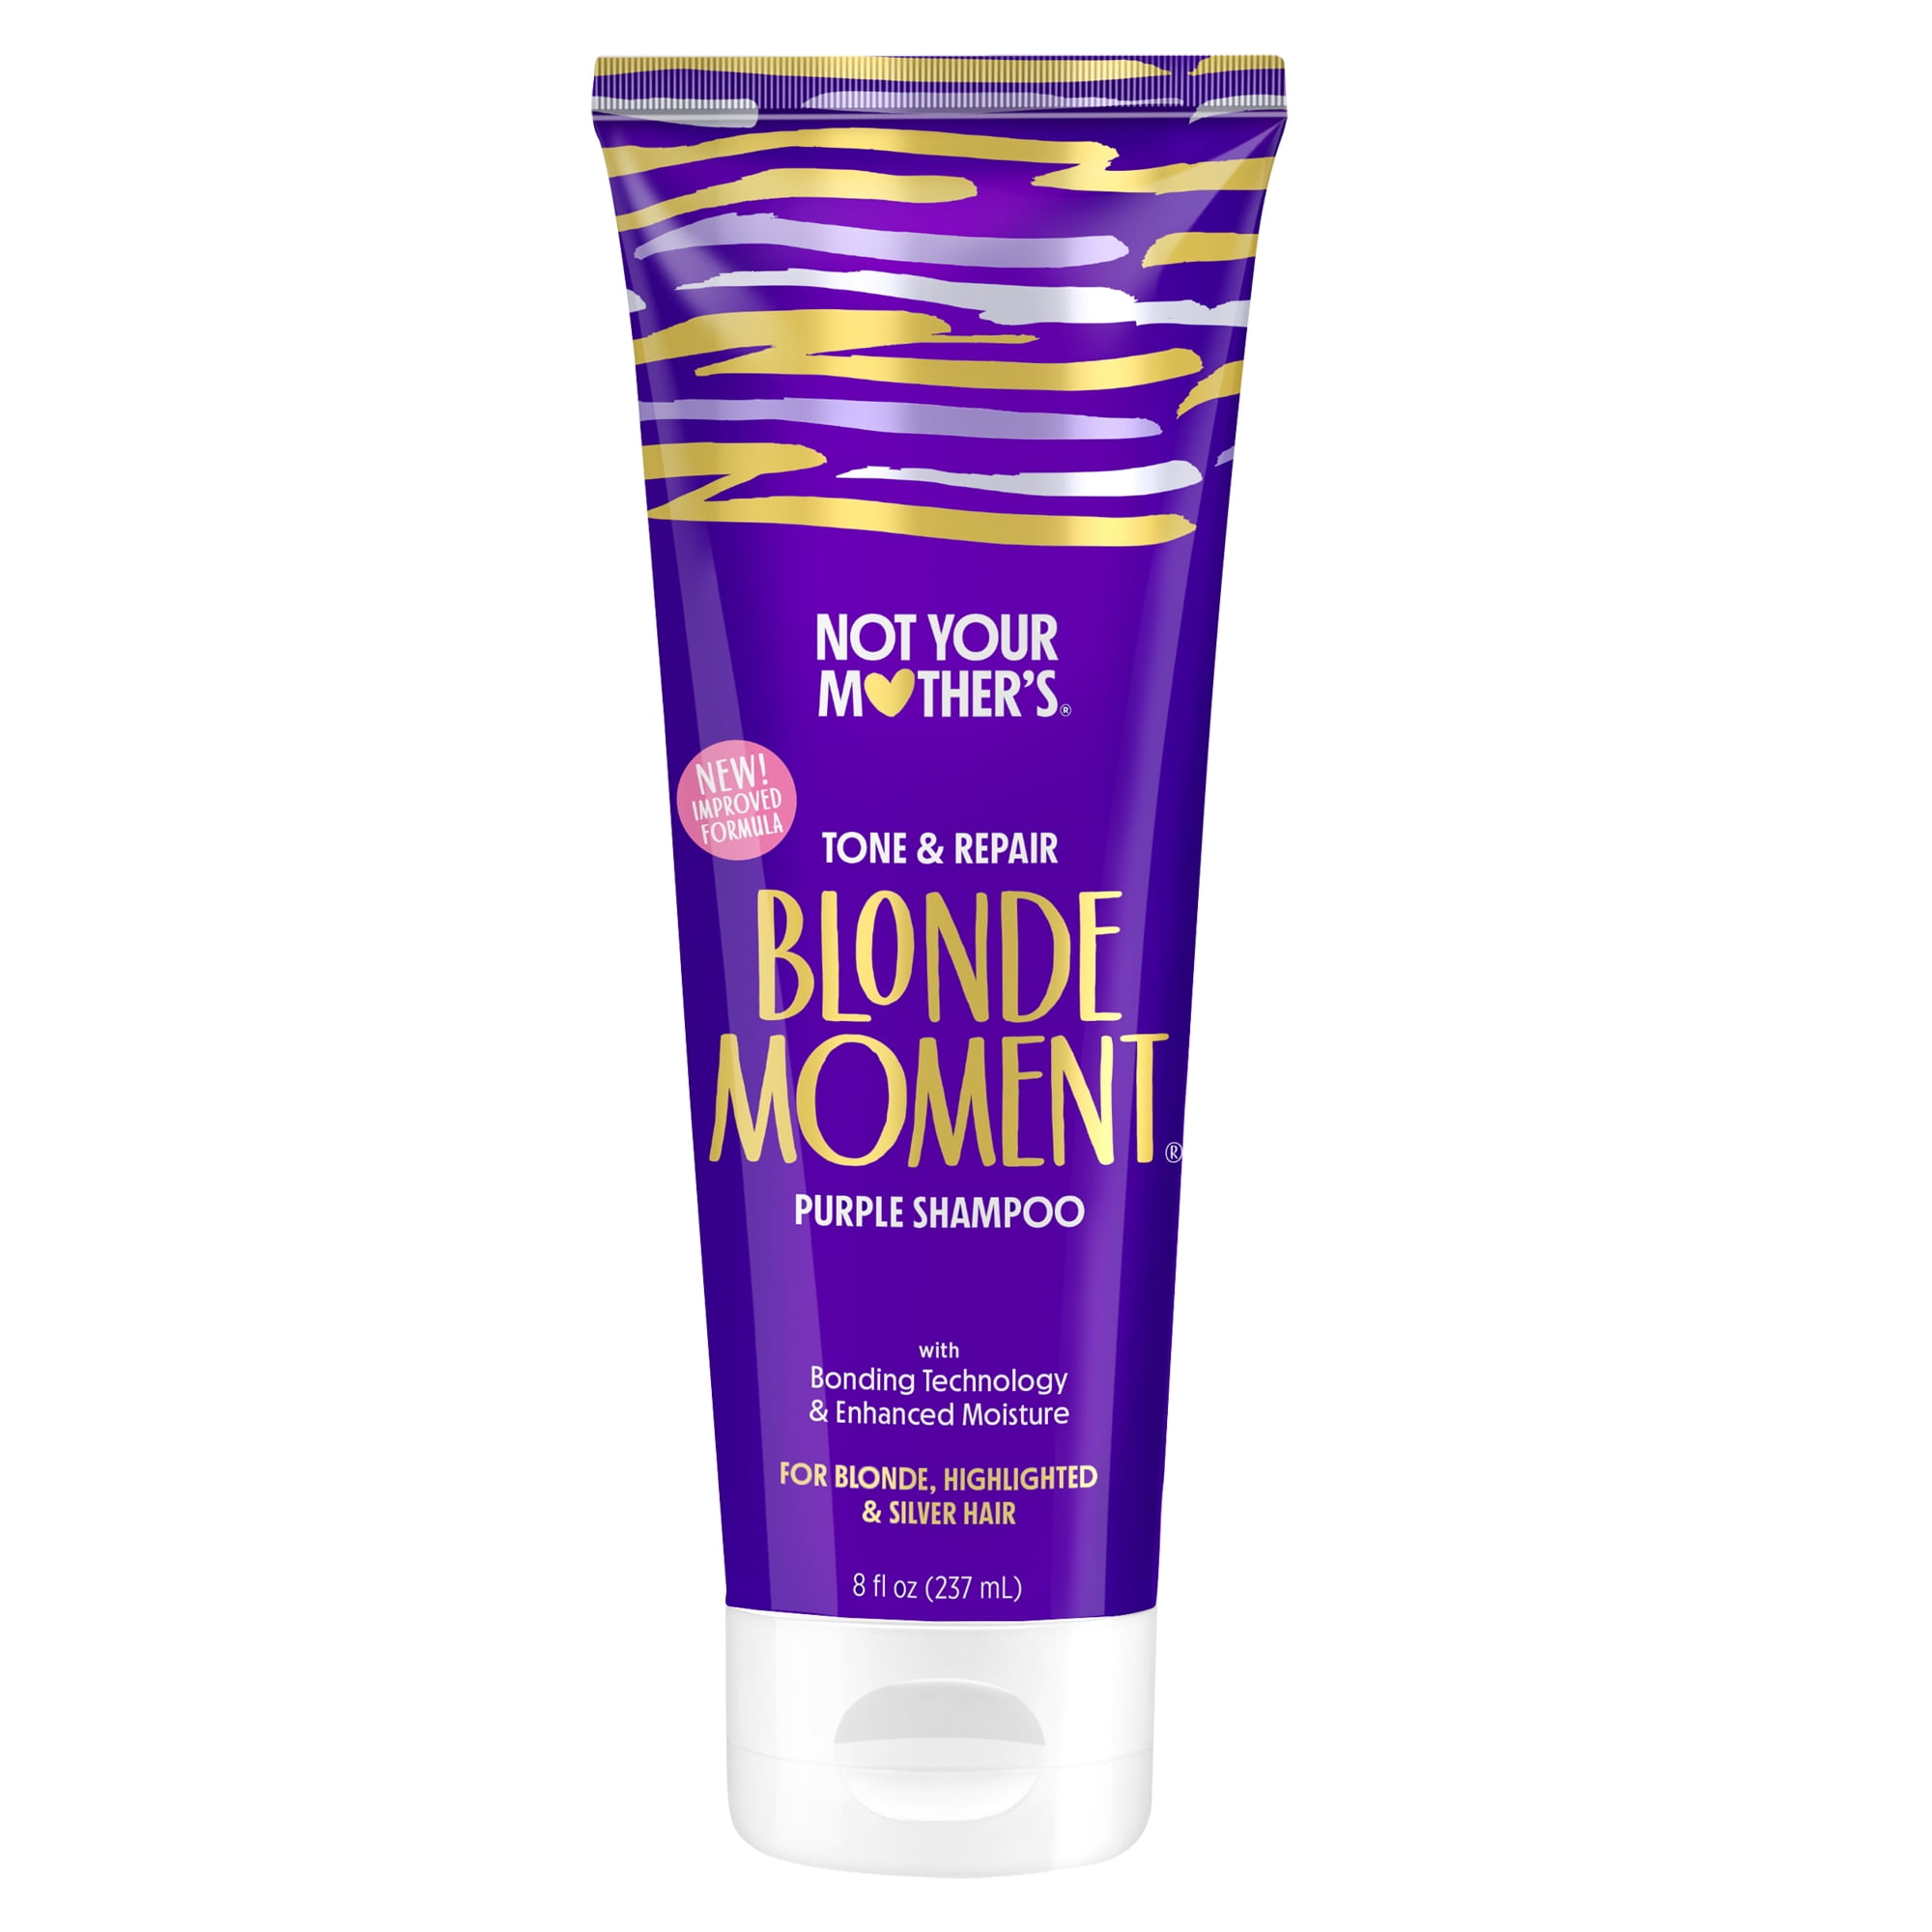 Not Your Mother's Blonde Moment Treatment Shampoo, 8.0 FL OZ